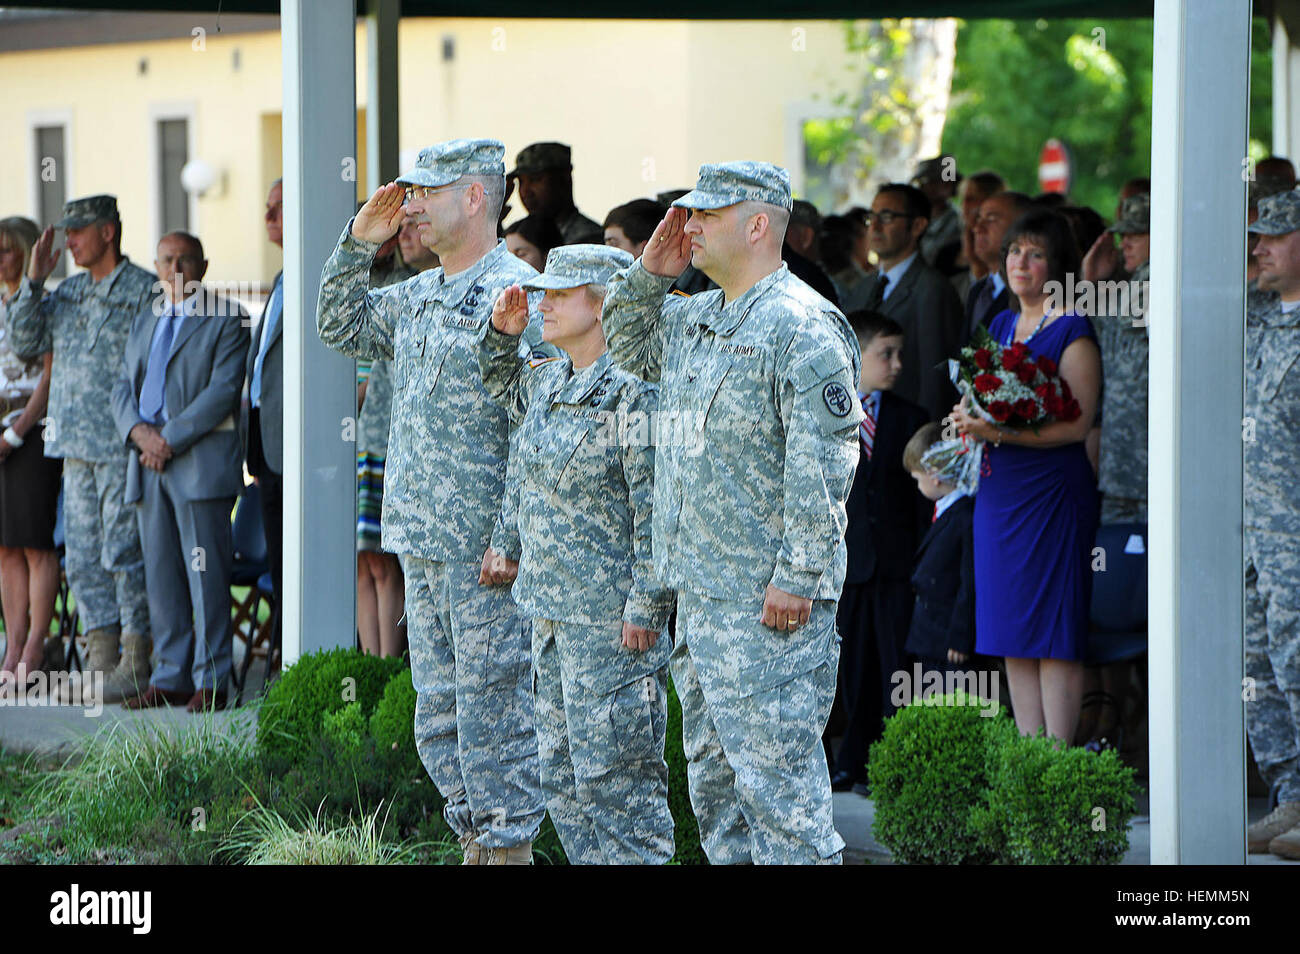 From the left, Col. Daniel W. Gall, outgoing commander of Health Clinic-Vicenza, Col. Judith A. Lee, commander, Landstuhl Regional Medical Center, Col. Andrew M. Barr, incoming commander, salute during the change of command ceremony, Caserma Ederle, Vicenza, Italy, July 9, 2013. (Photo by Barbara Romano/released) Health Center-Vicenza change of command 130709-A-VY358-004 Stock Photo